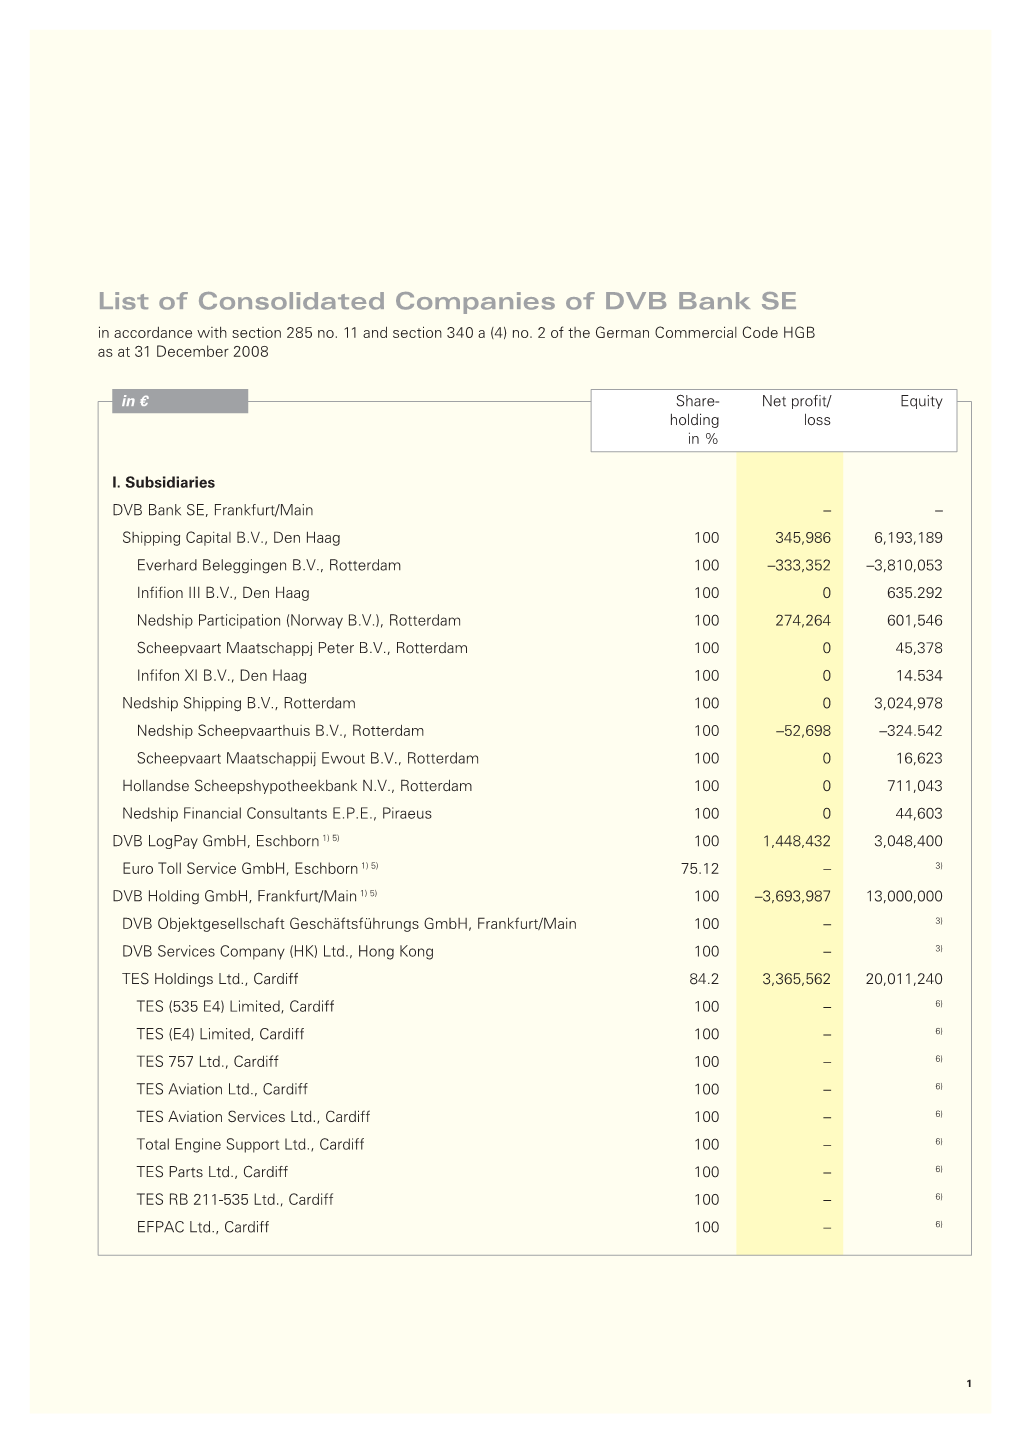 List of Consolidated Companies of DVB Bank SE in Accordance with Section 285 No